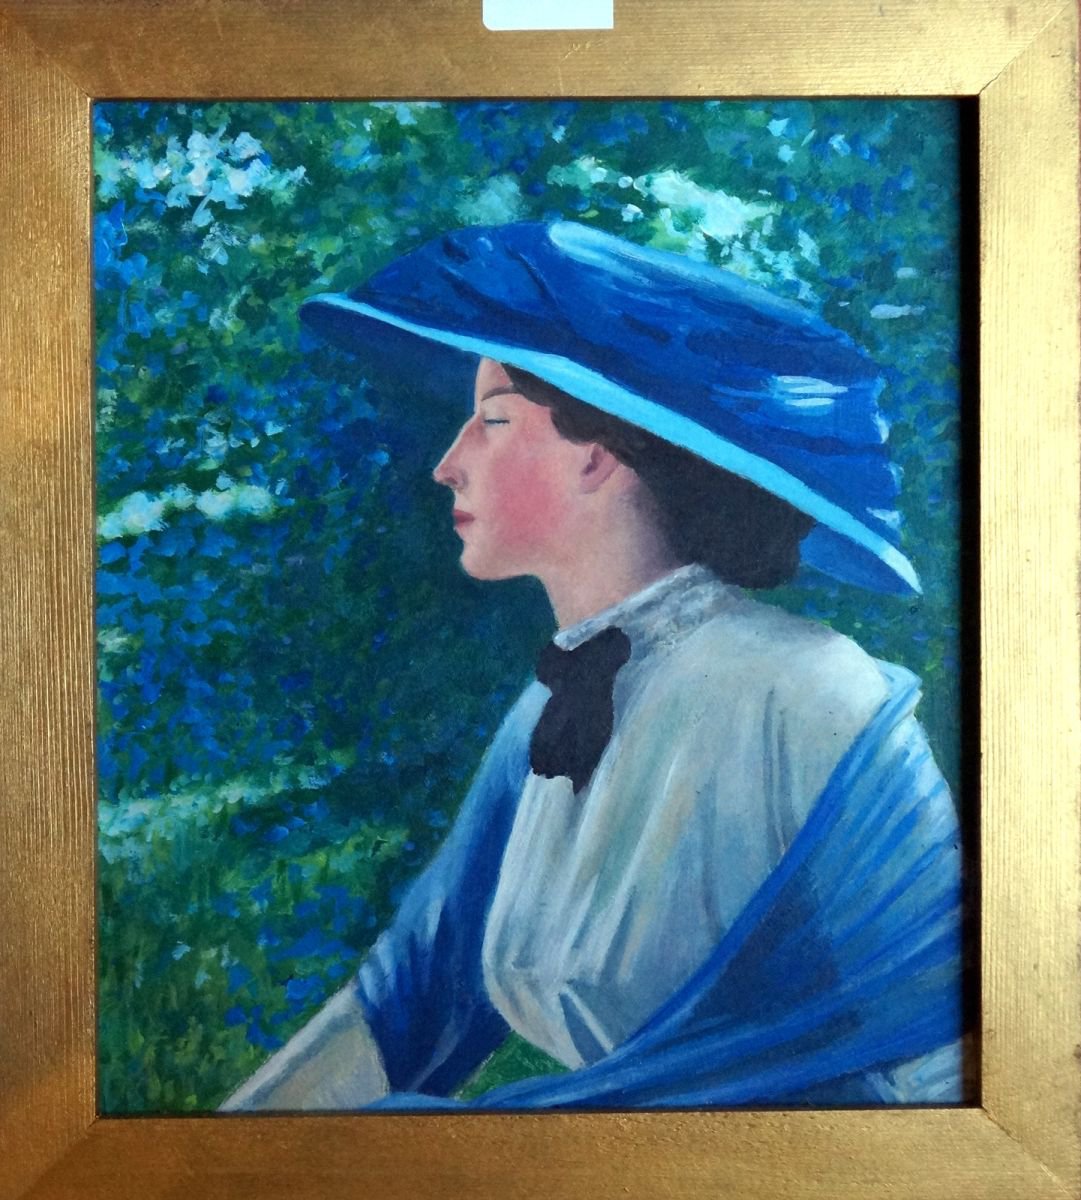 Florence Carter Wood (After Laura Knight) by Tim Treagust